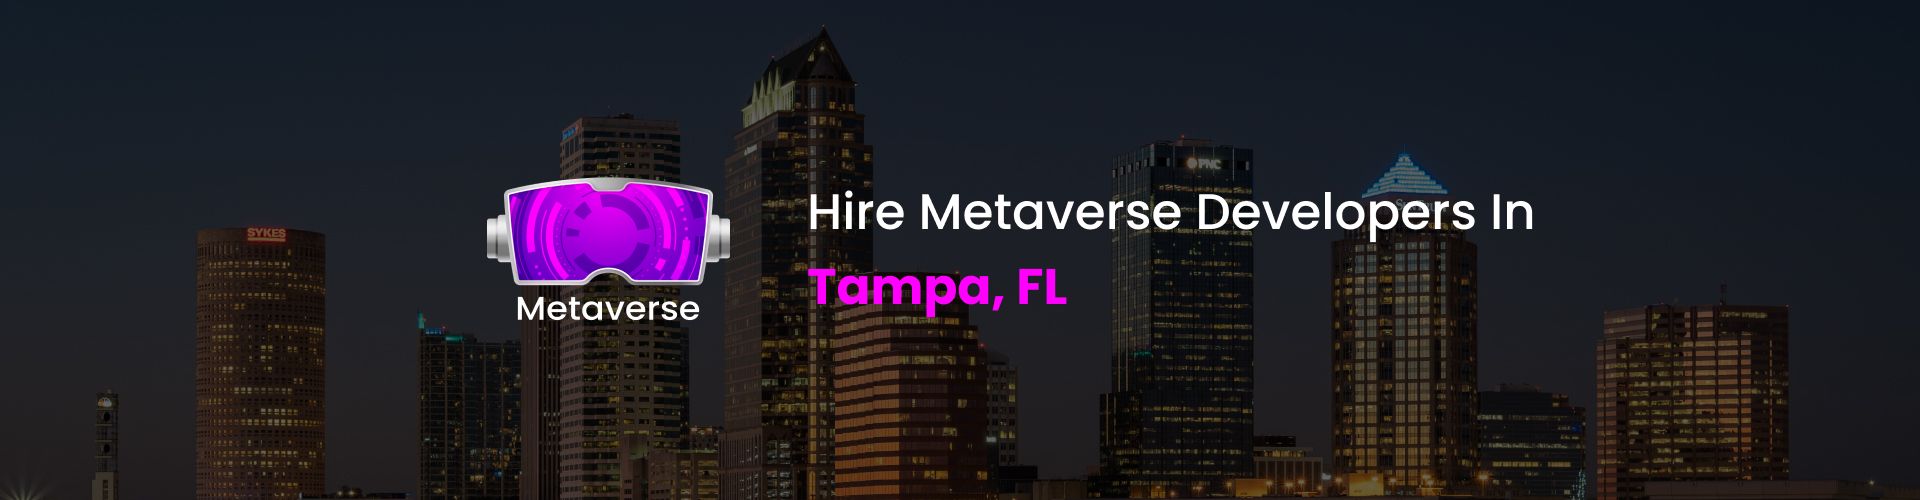 hire metaverse developers in tampa, fl